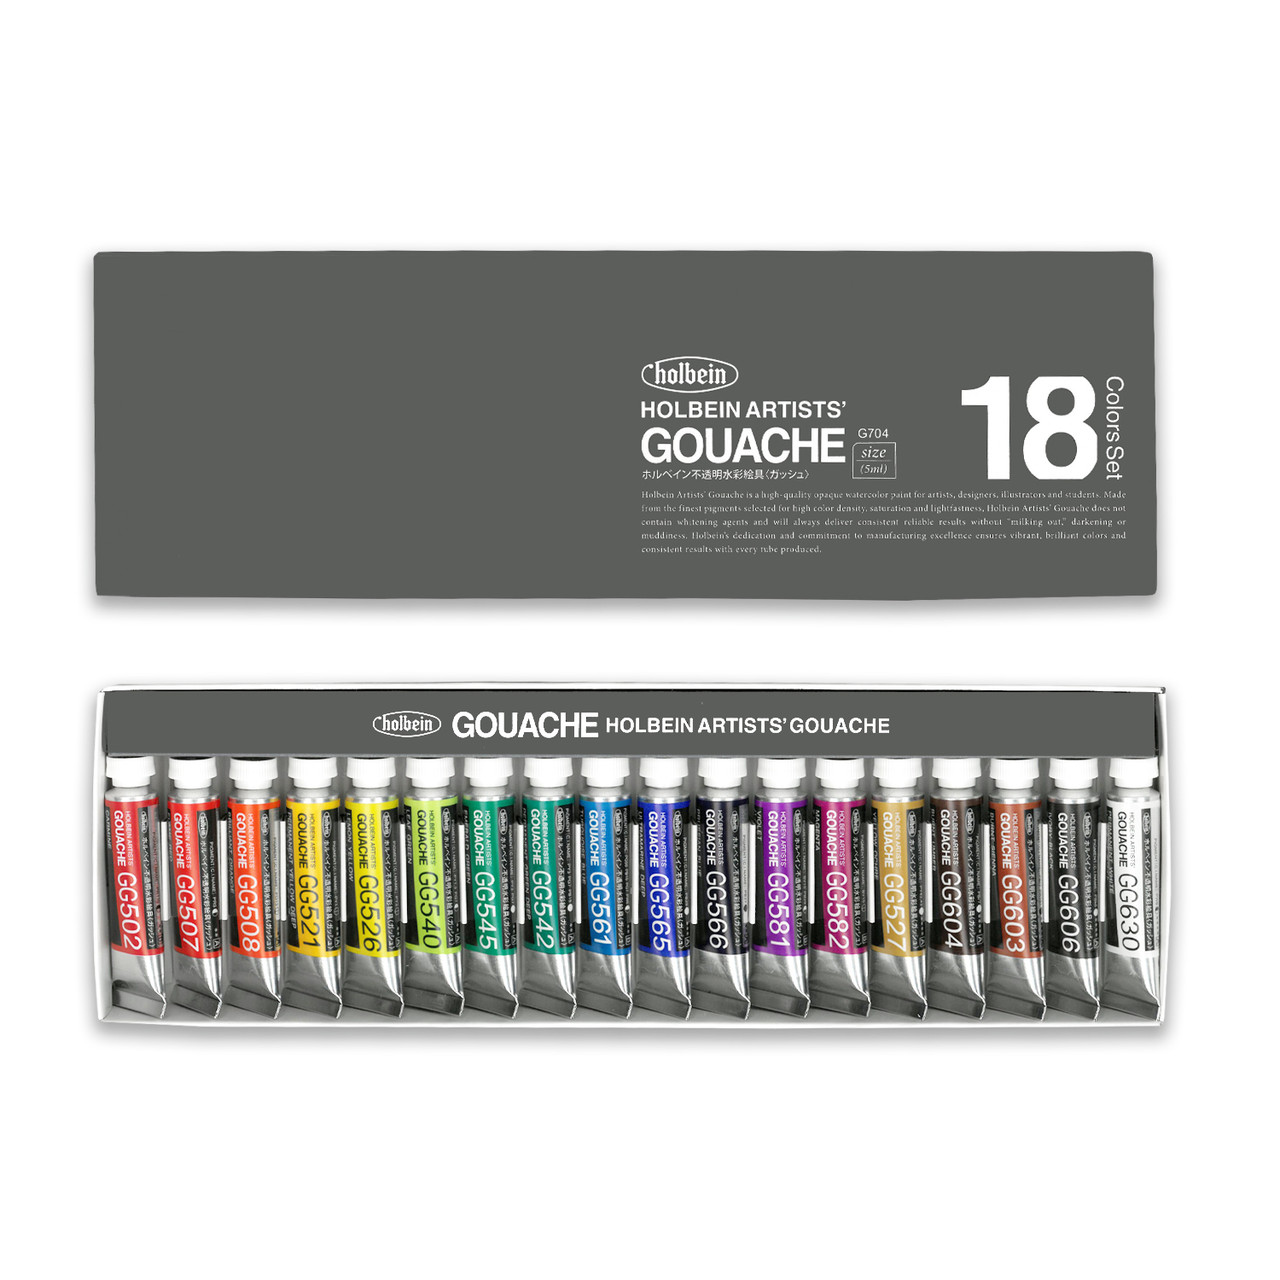 Watercolor Confections Paint Set, 12 Vivid Colors, Matte Finish, with 1 Set  of Paint Brushes and Black Permanent Marker, For Professional Artists and